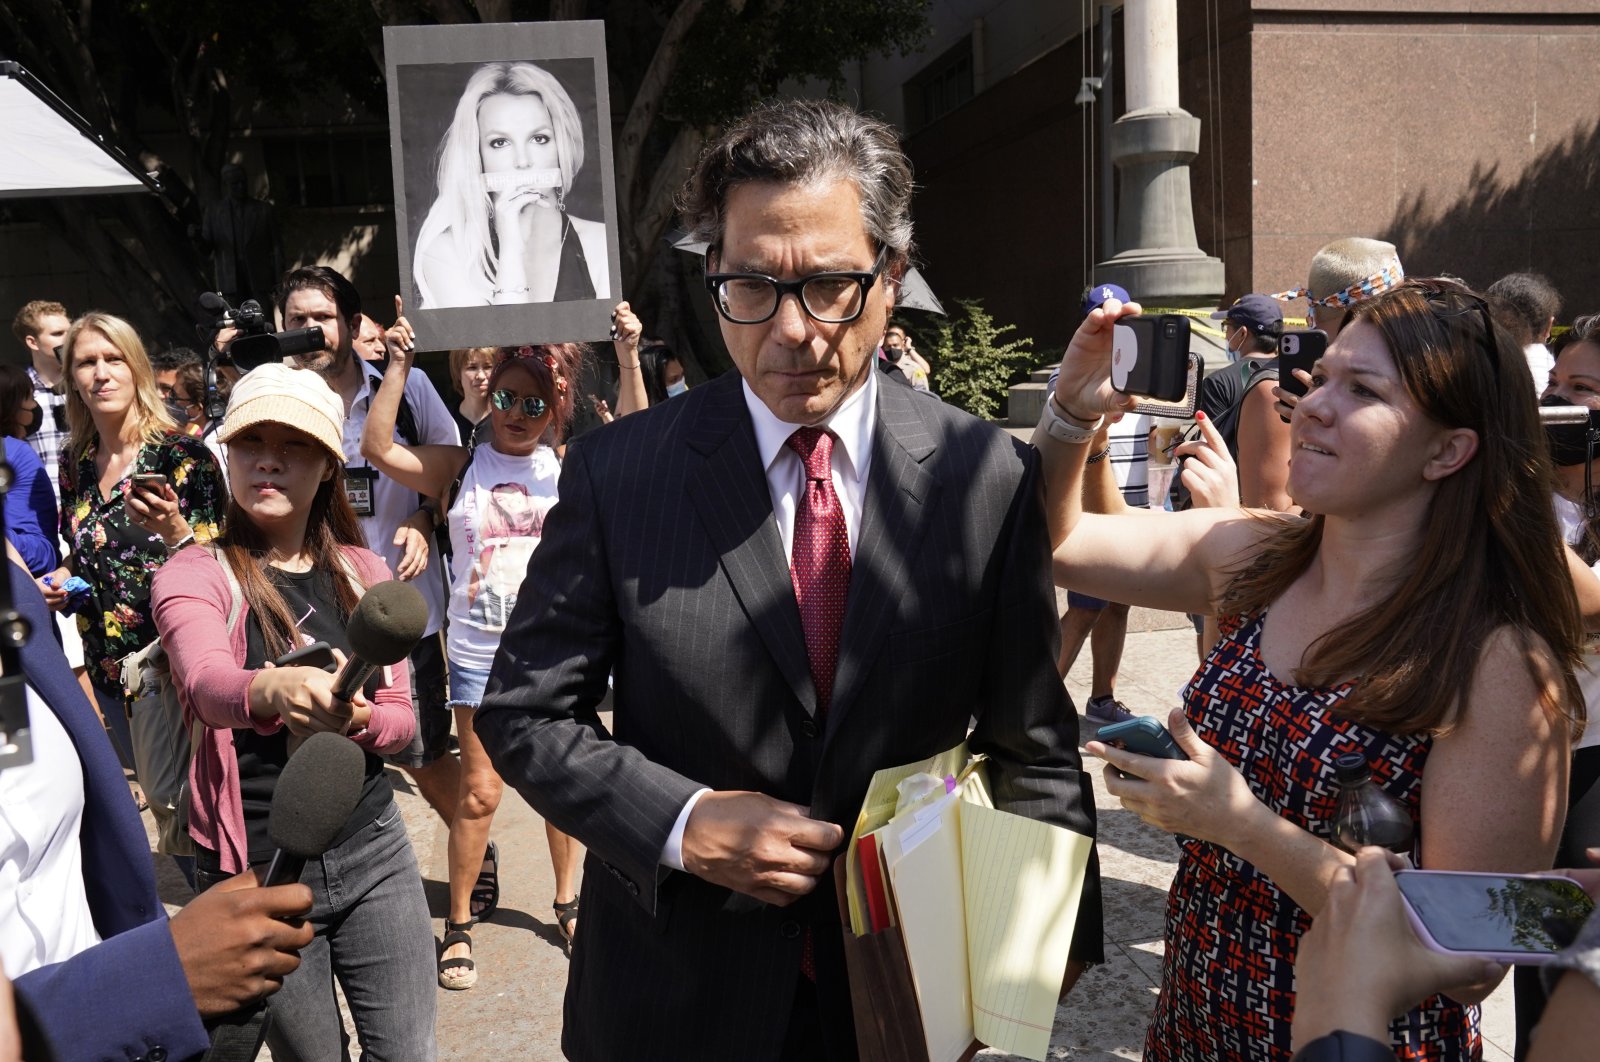 Britney Spears' newly appointed lawyer Mathew Rosengart leaves the Stanley Mosk Courthouse following a hearing concerning the pop singer's conservatorship, Los Angeles, U.S., July 14, 2021. (AP Photo)